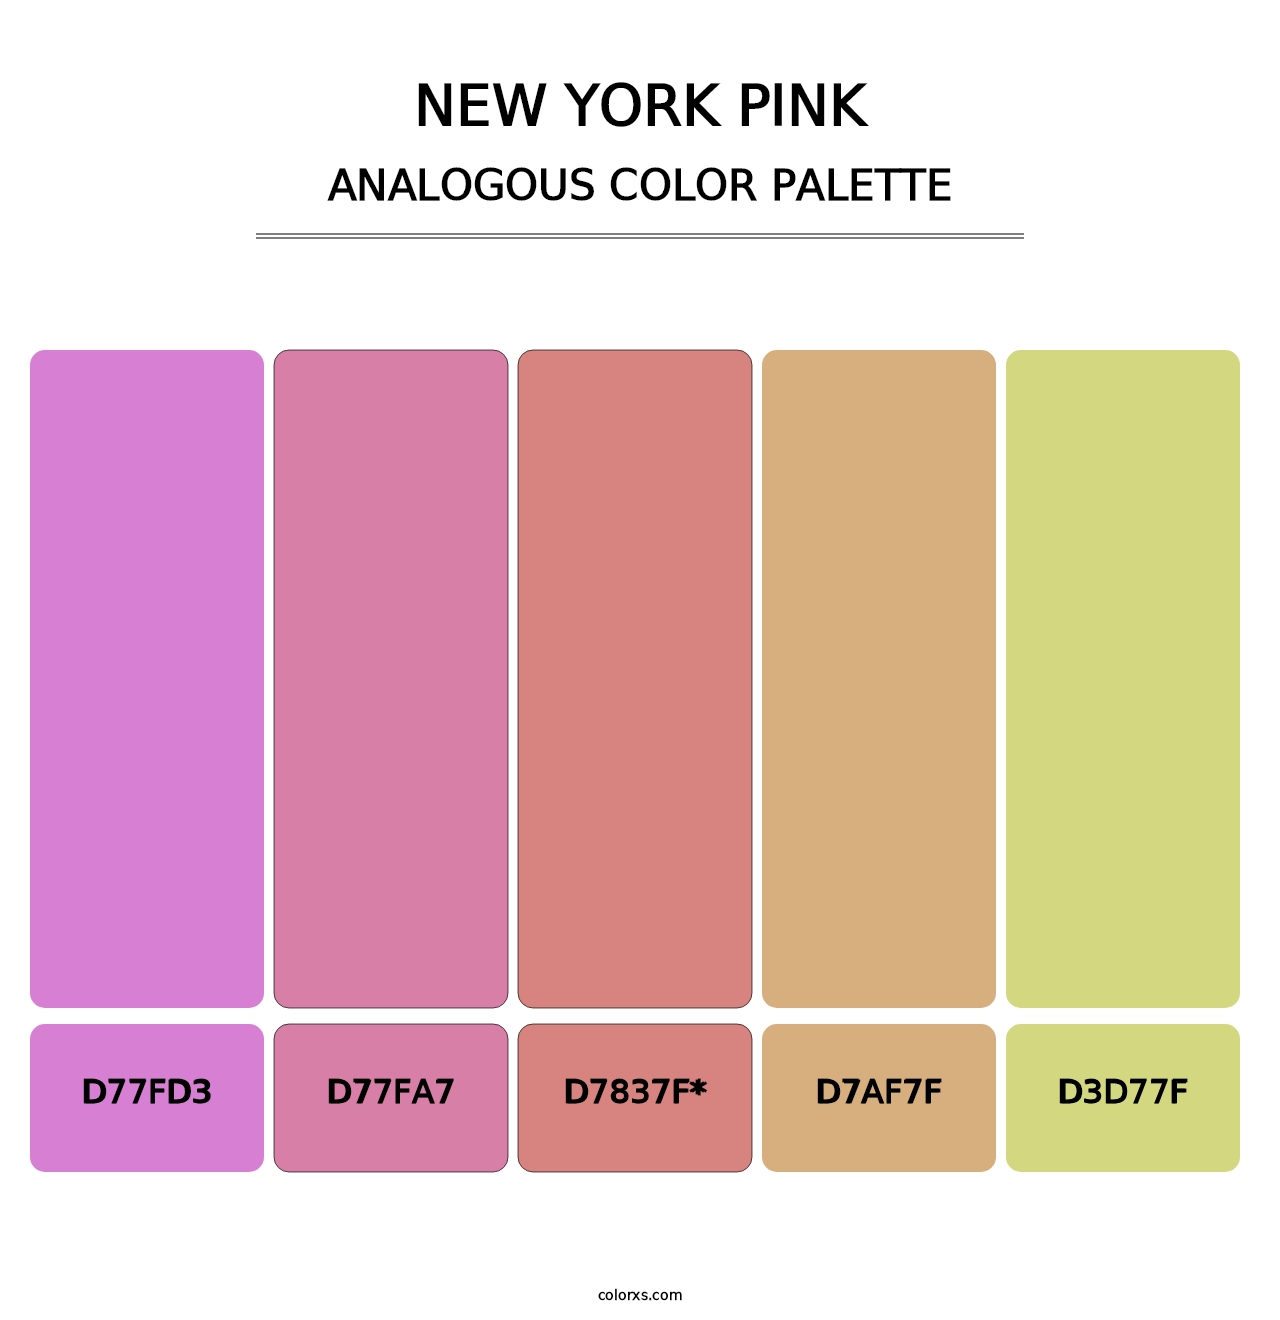 New York Pink - Analogous Color Palette